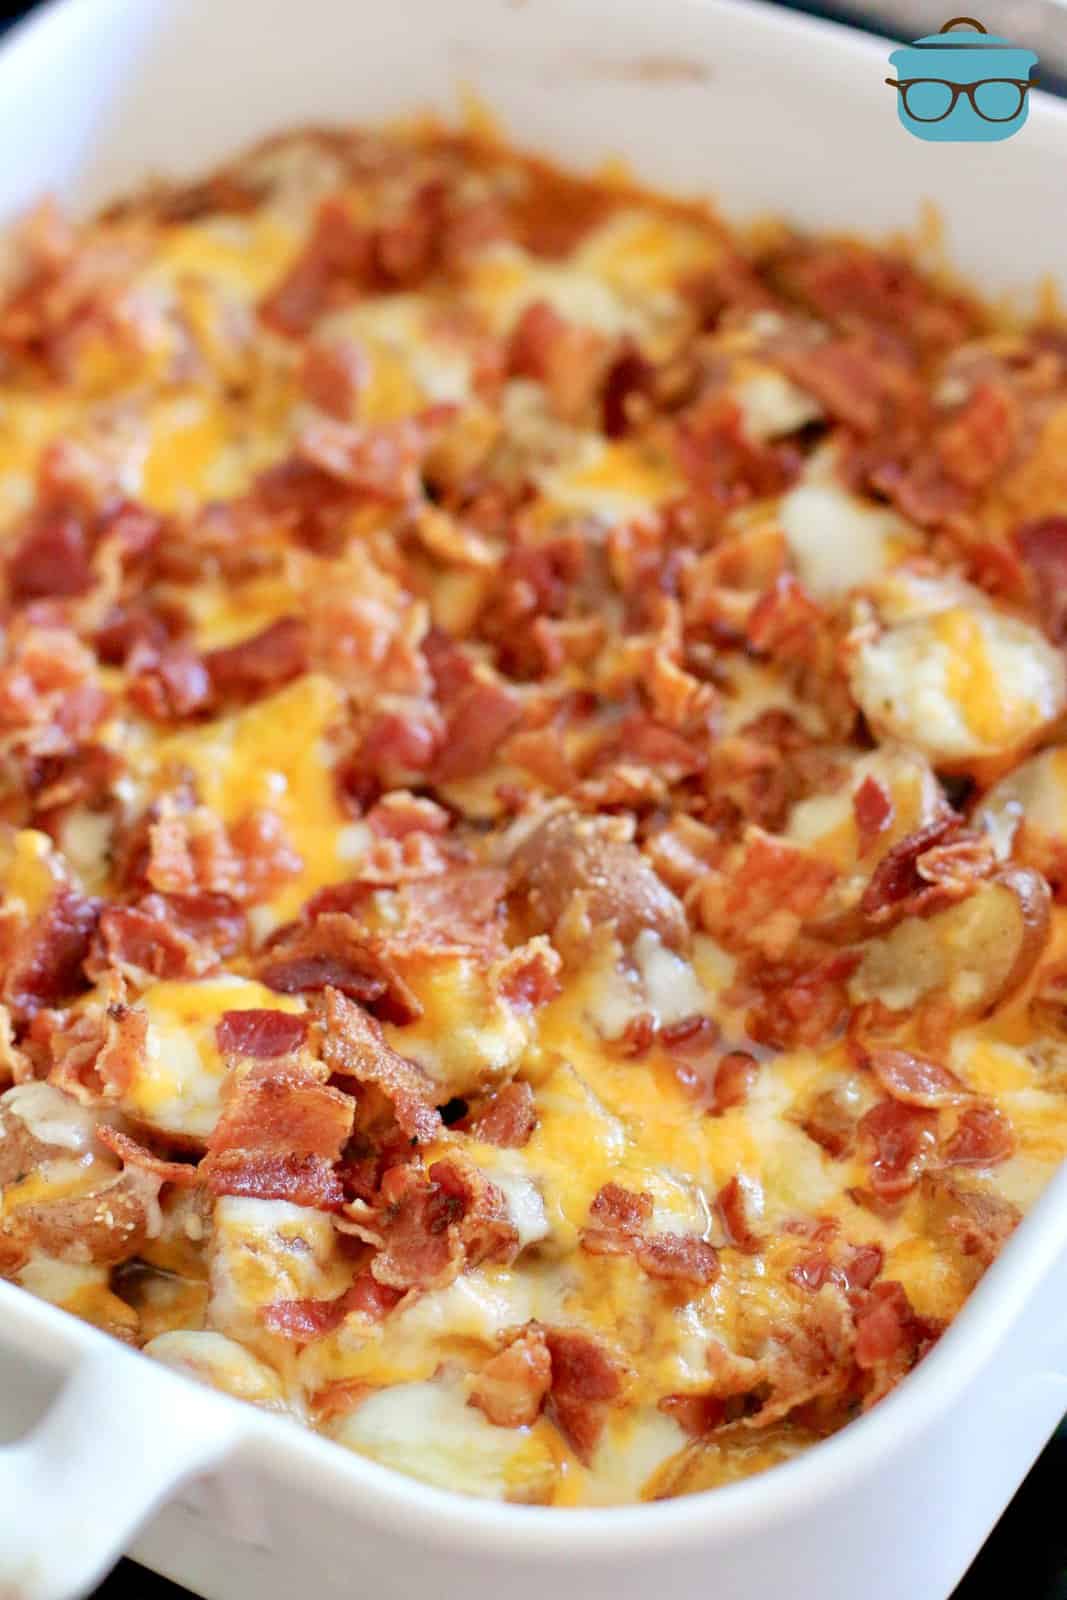 melted cheese and crumbled bacon shown on cooked potatoes in a white baking dish.